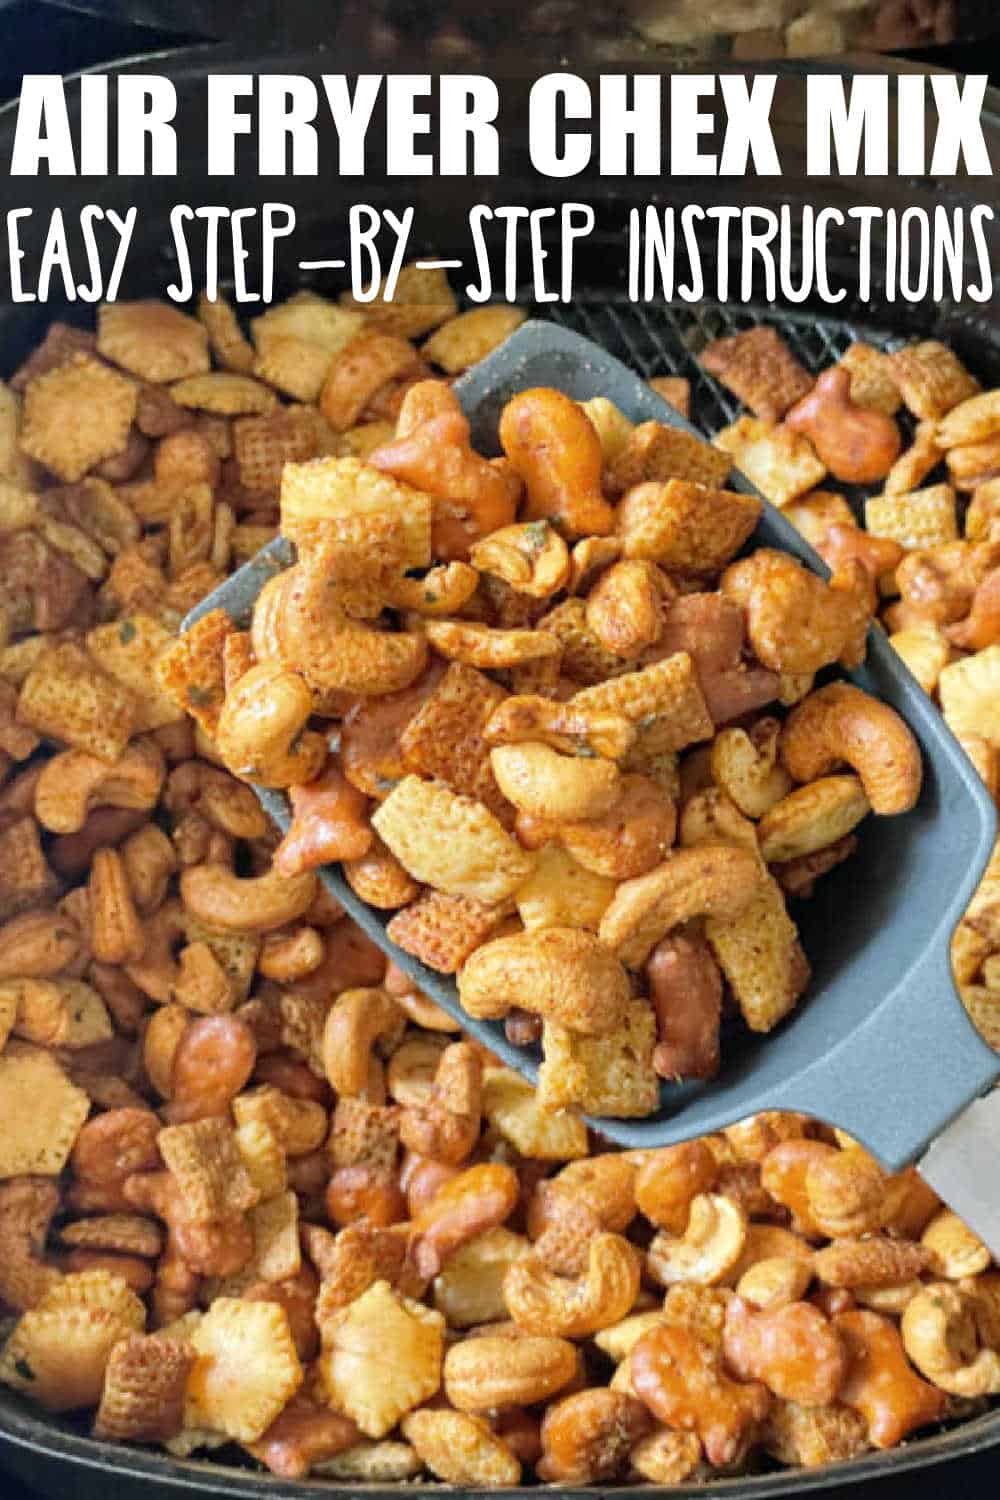 My Air Fryer Chex Mix combines rice Chex, Goldfish pretzels, oyster crackers and cashews with an Old Bay seasoning mix and buttery sauce. It's perfect for summer snacking! An air fryer is superior to your oven in making this popular snack mix.  via @foodtasticmom